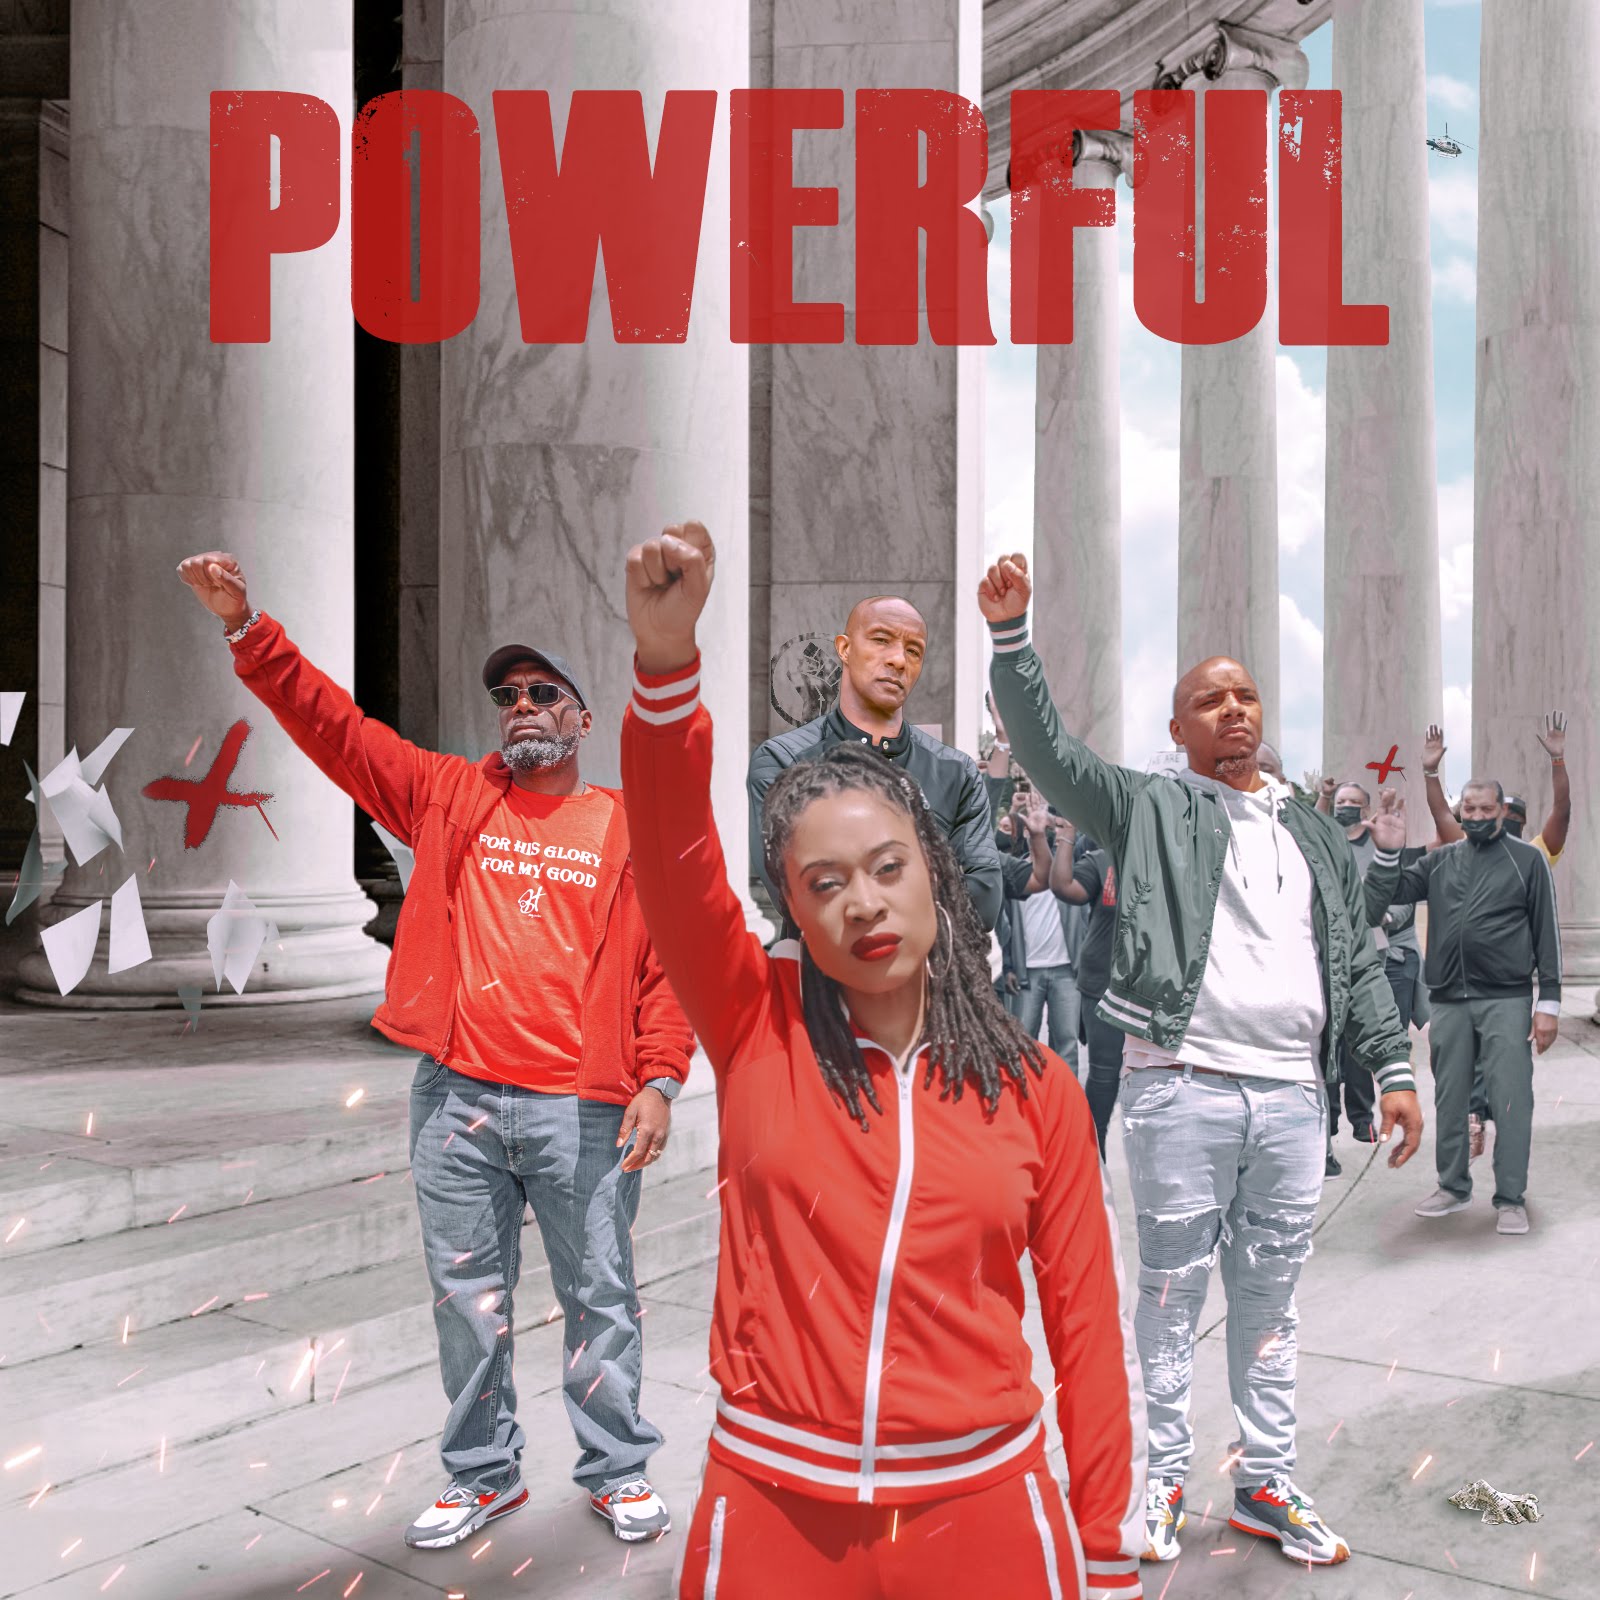 RISING ARTISTS GRACE COVINGTON, HOLY SMOKES, AND TWYSE RELEASE “POWERFUL” SINGLE ON FEDERAL HOLIDAY JUNETEENTH. 